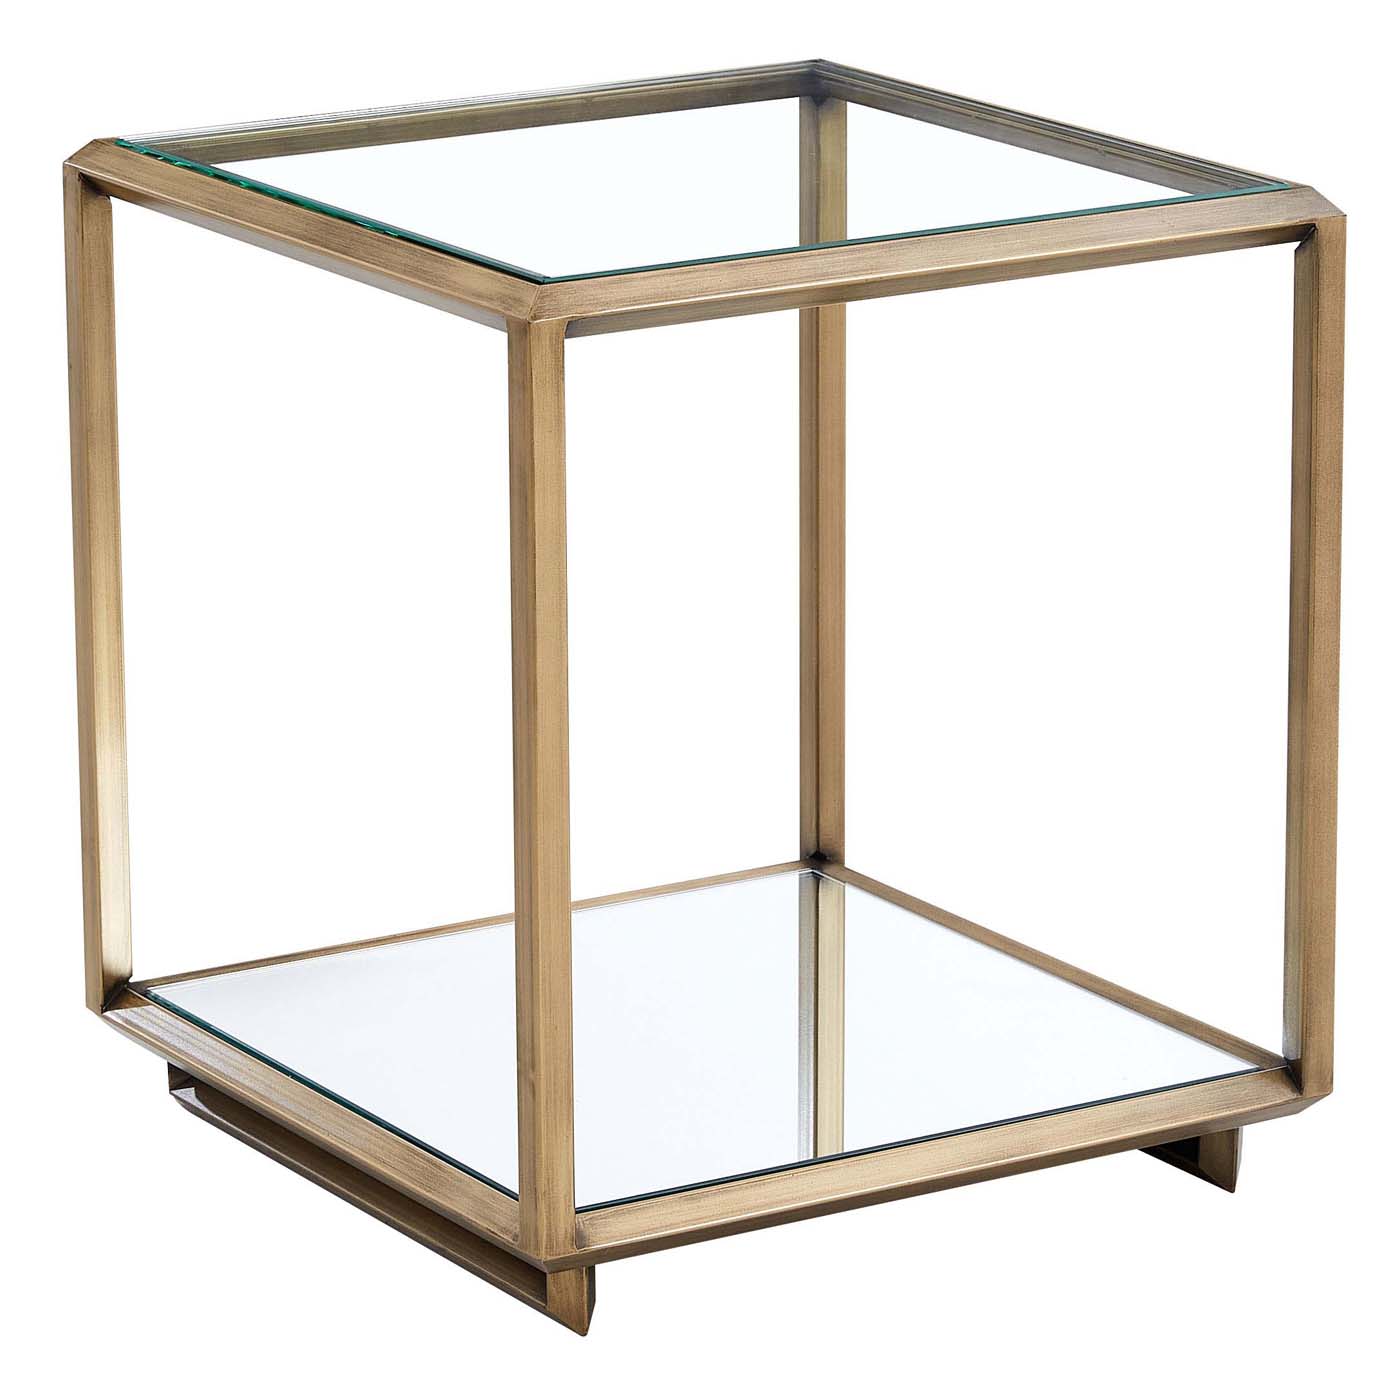 Safavieh Couture Florabella Mirrored Accent Table